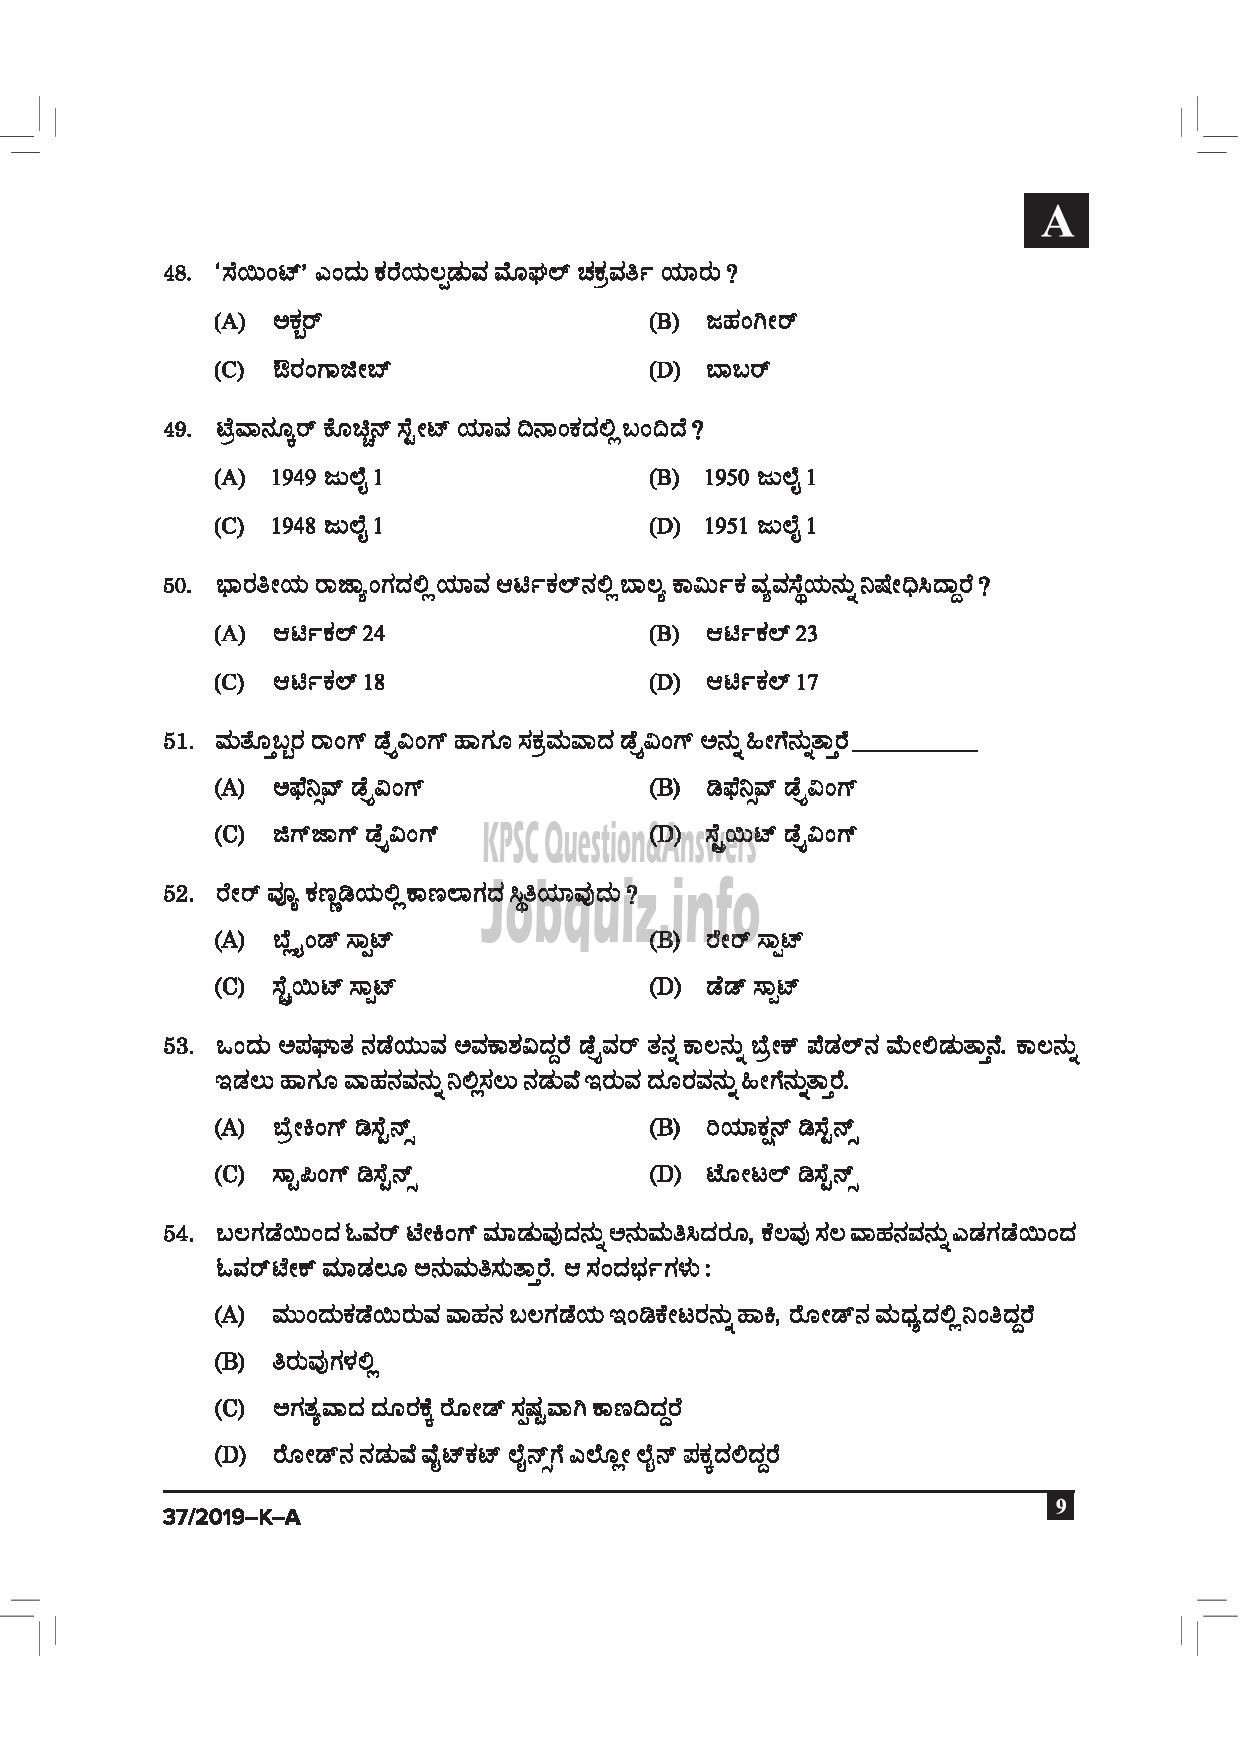 Kerala PSC Question Paper - DRIVER CUM OFFICE ATTENDANT / POLICE CONSTABLE DRIVER GOVT OWNED COMP / CORP / BOARD / POLICE KANNADA -9